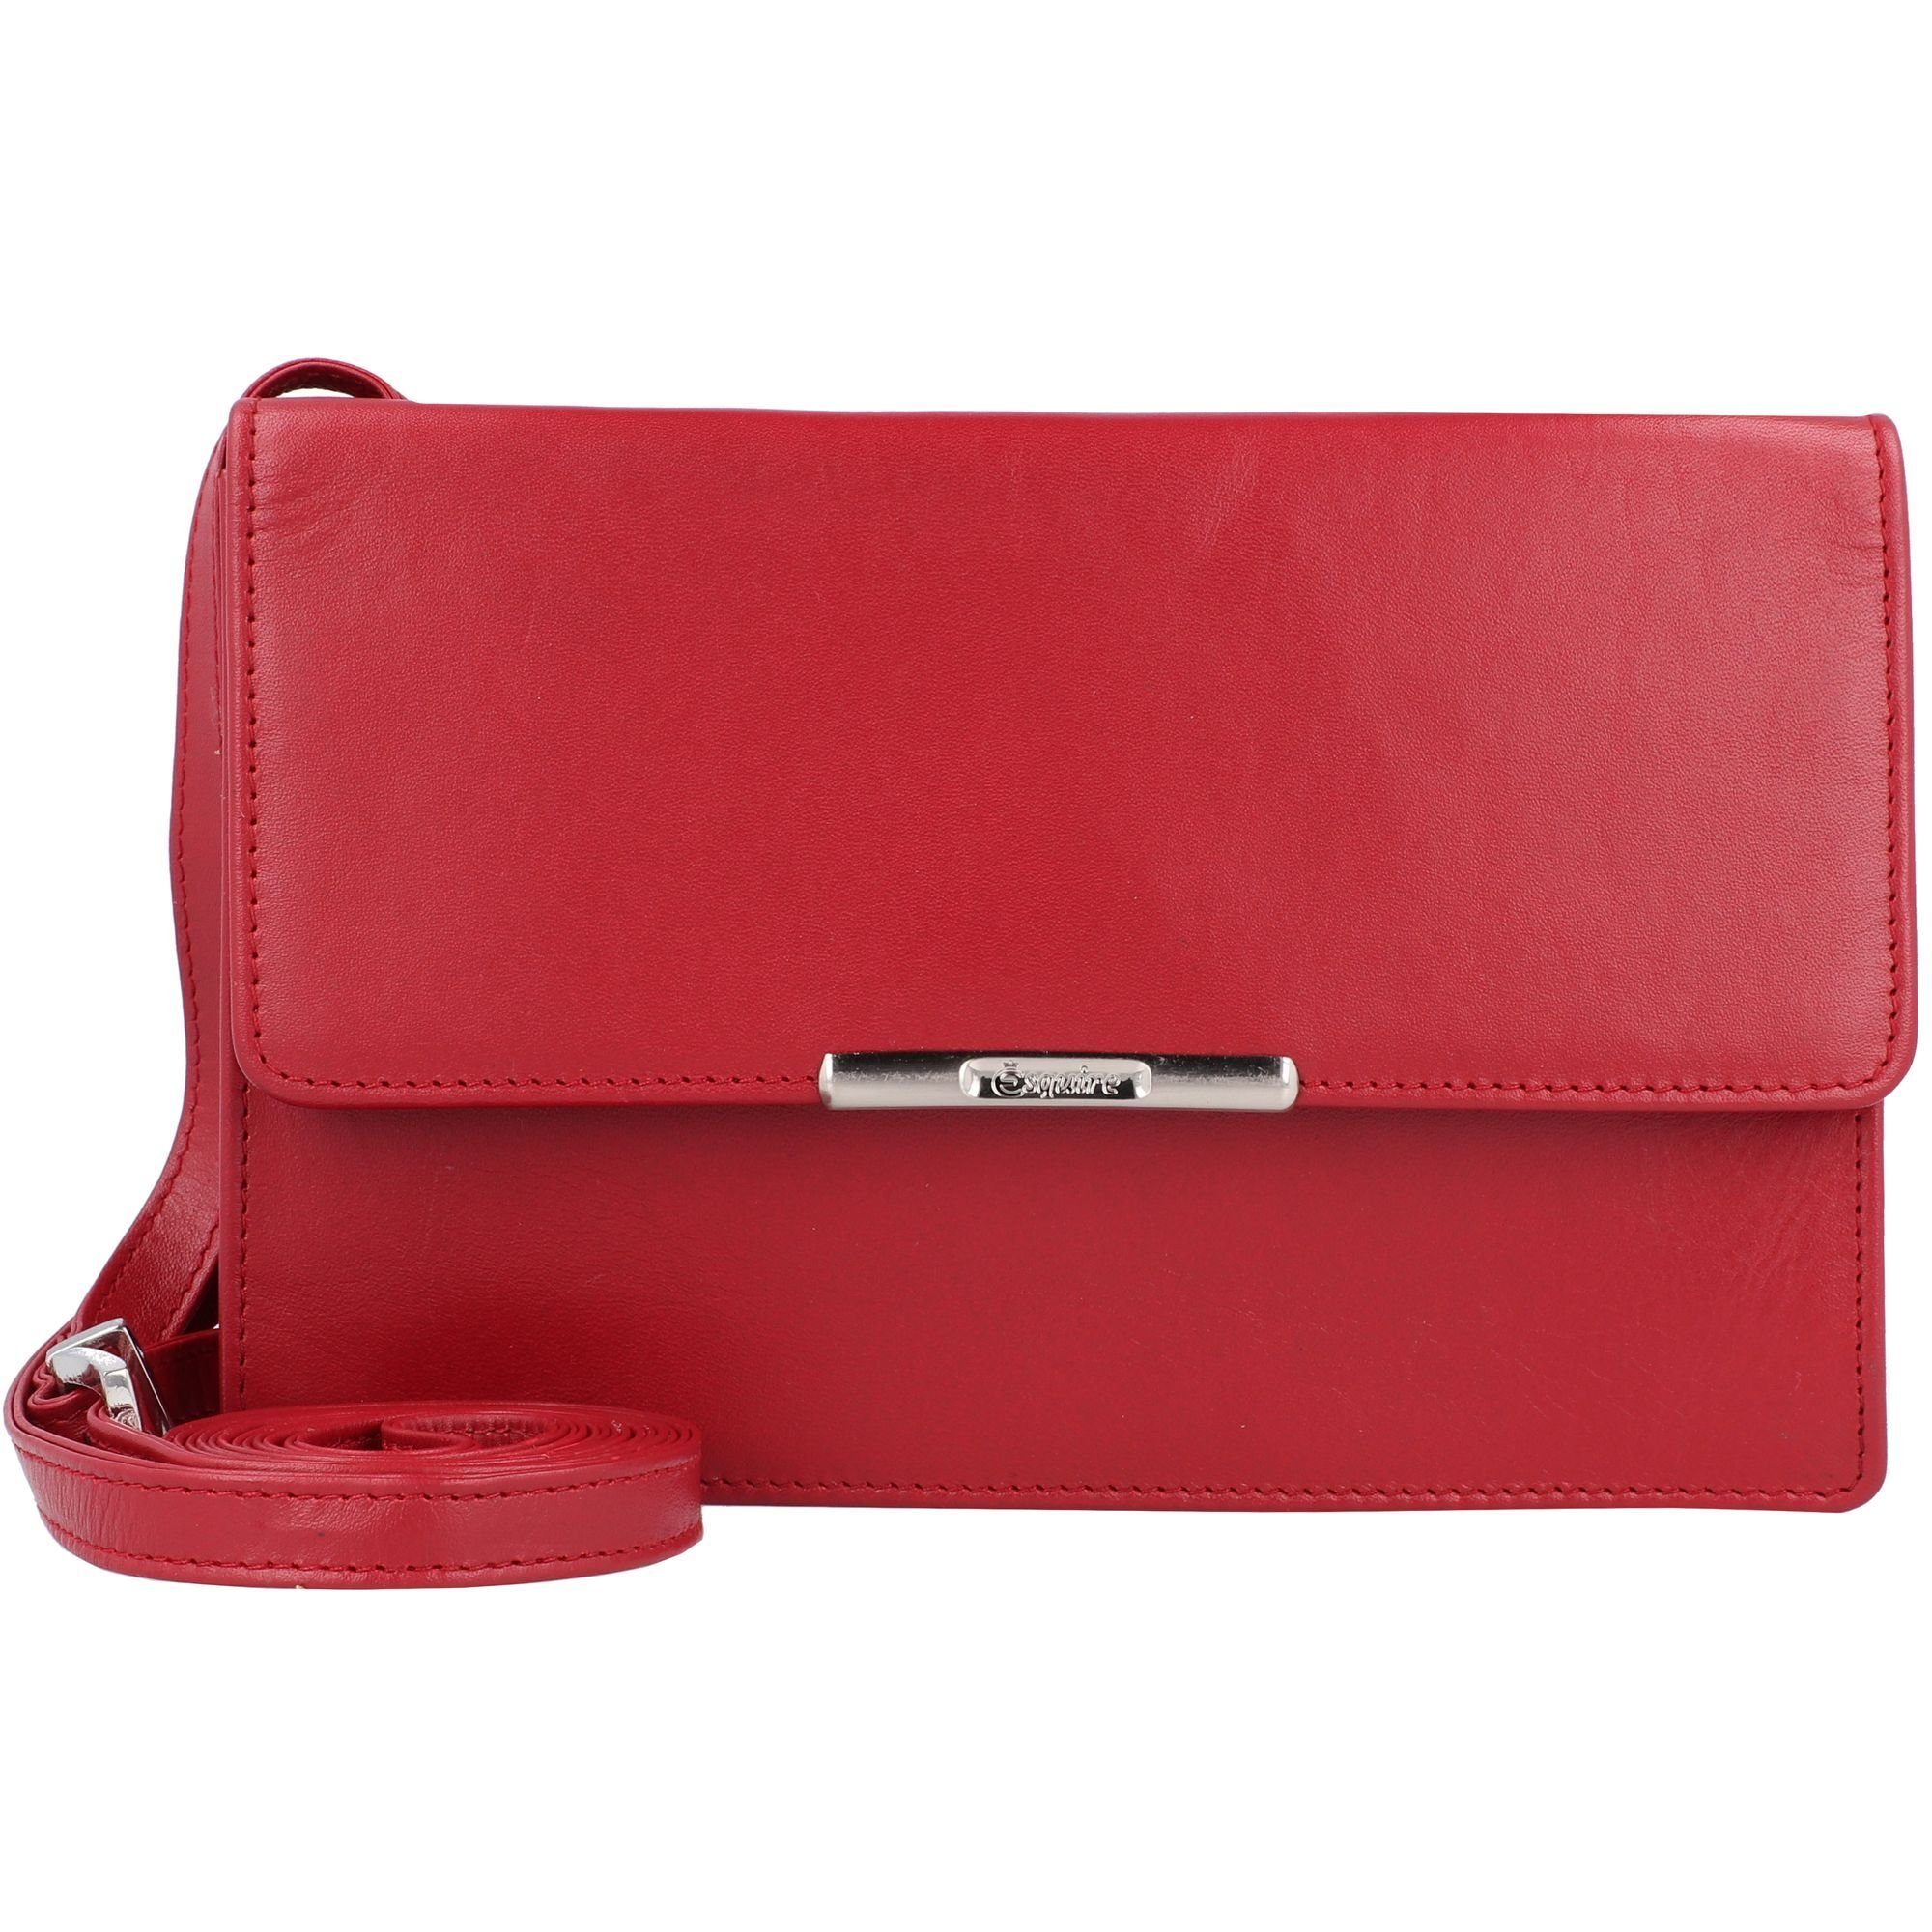 Leder rot Clutch Esquire Helena,